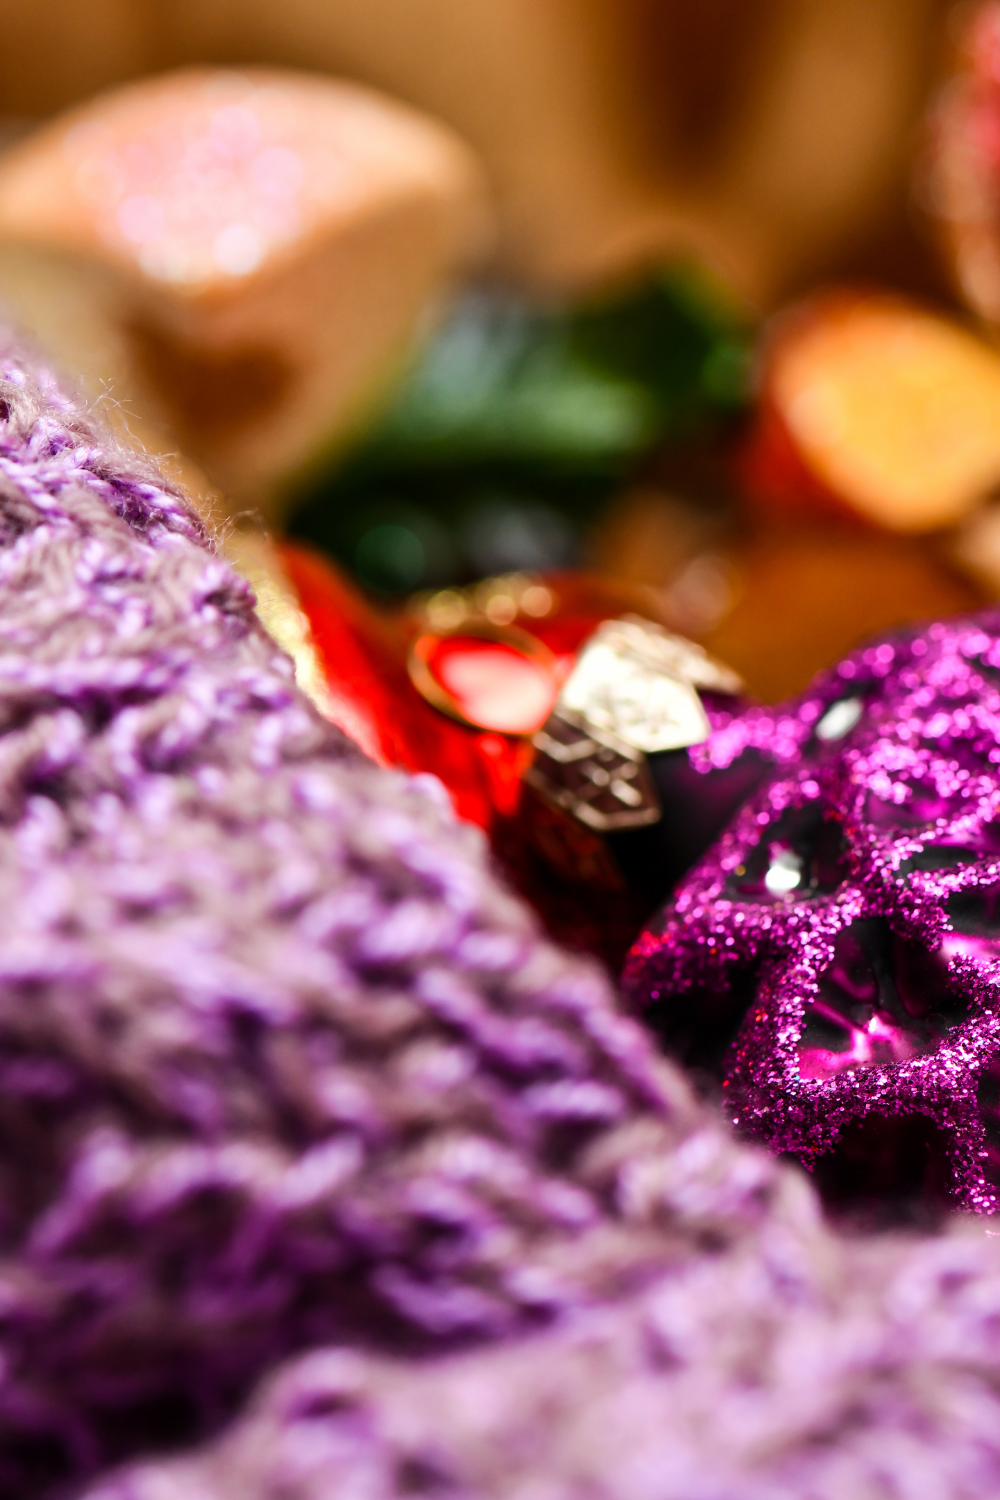 345 Christmas Knitting Patterns: The Ultimate Holiday Gift Guide